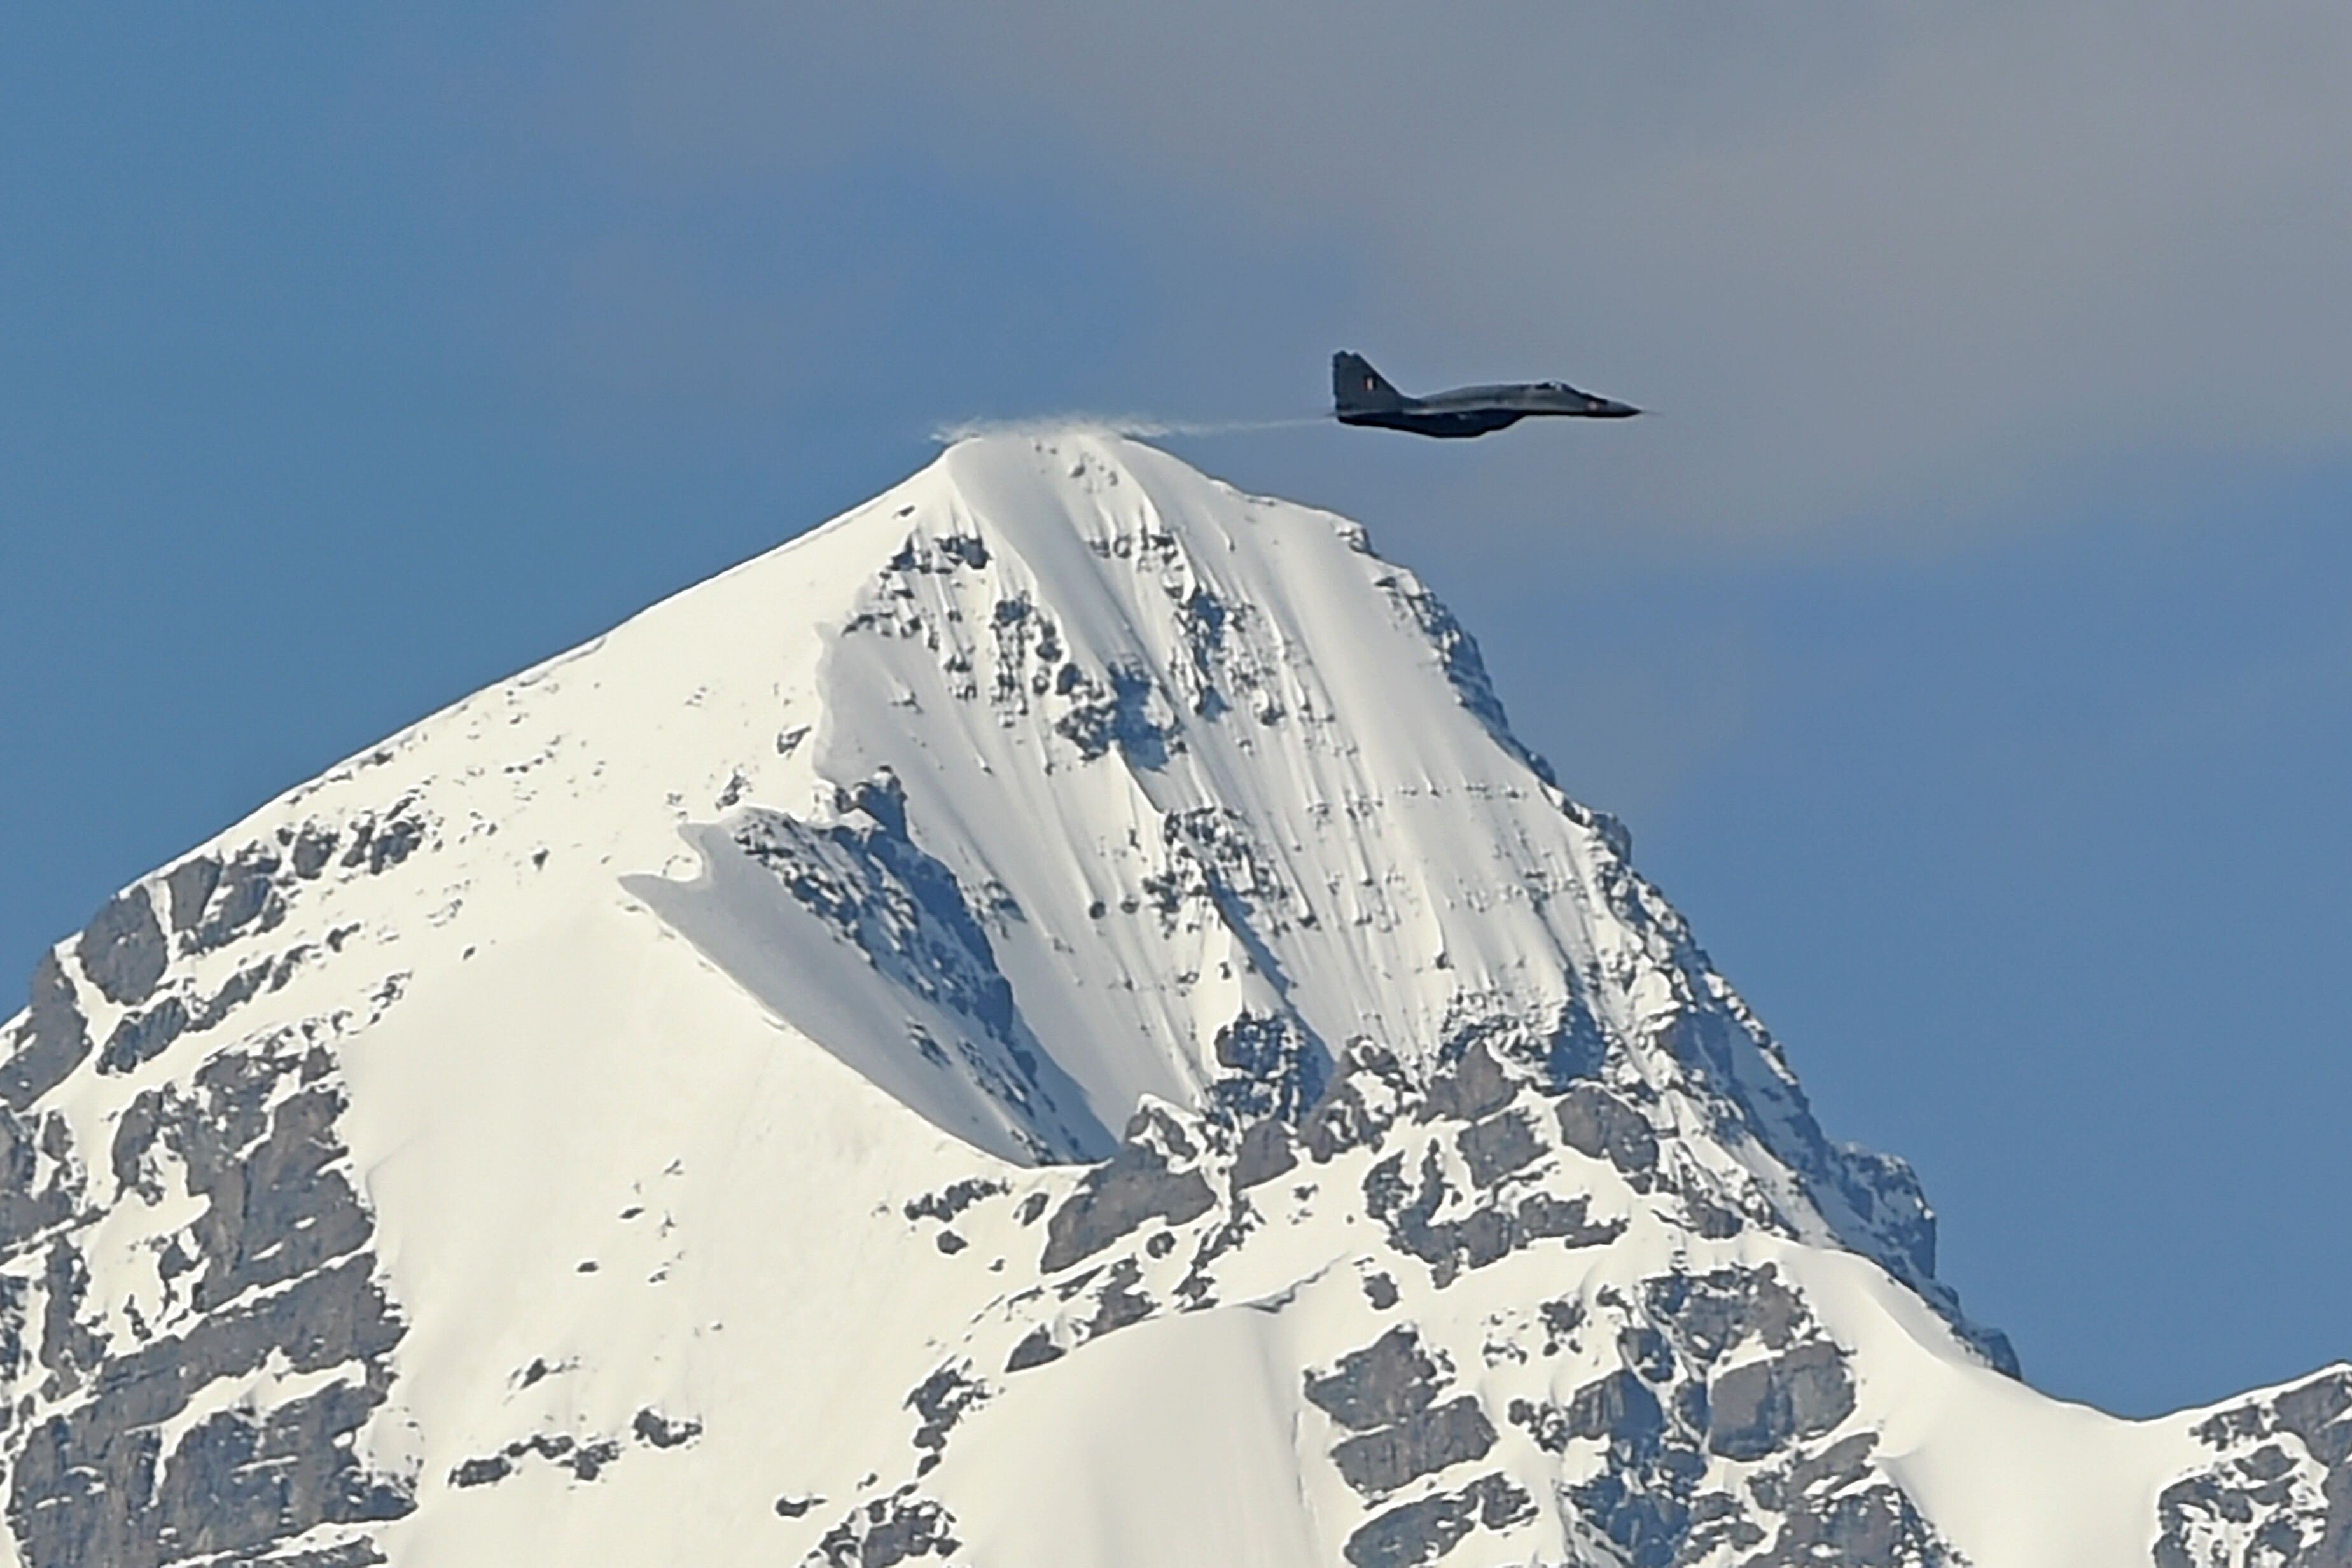 An Indian fighter jet flies over Leh, the capital of Ladakh, on June 26. The clashes between India and China over their disputed border have injected new impetus into India’s strengthening ties with the United States in the defence realm. Photo: AFP